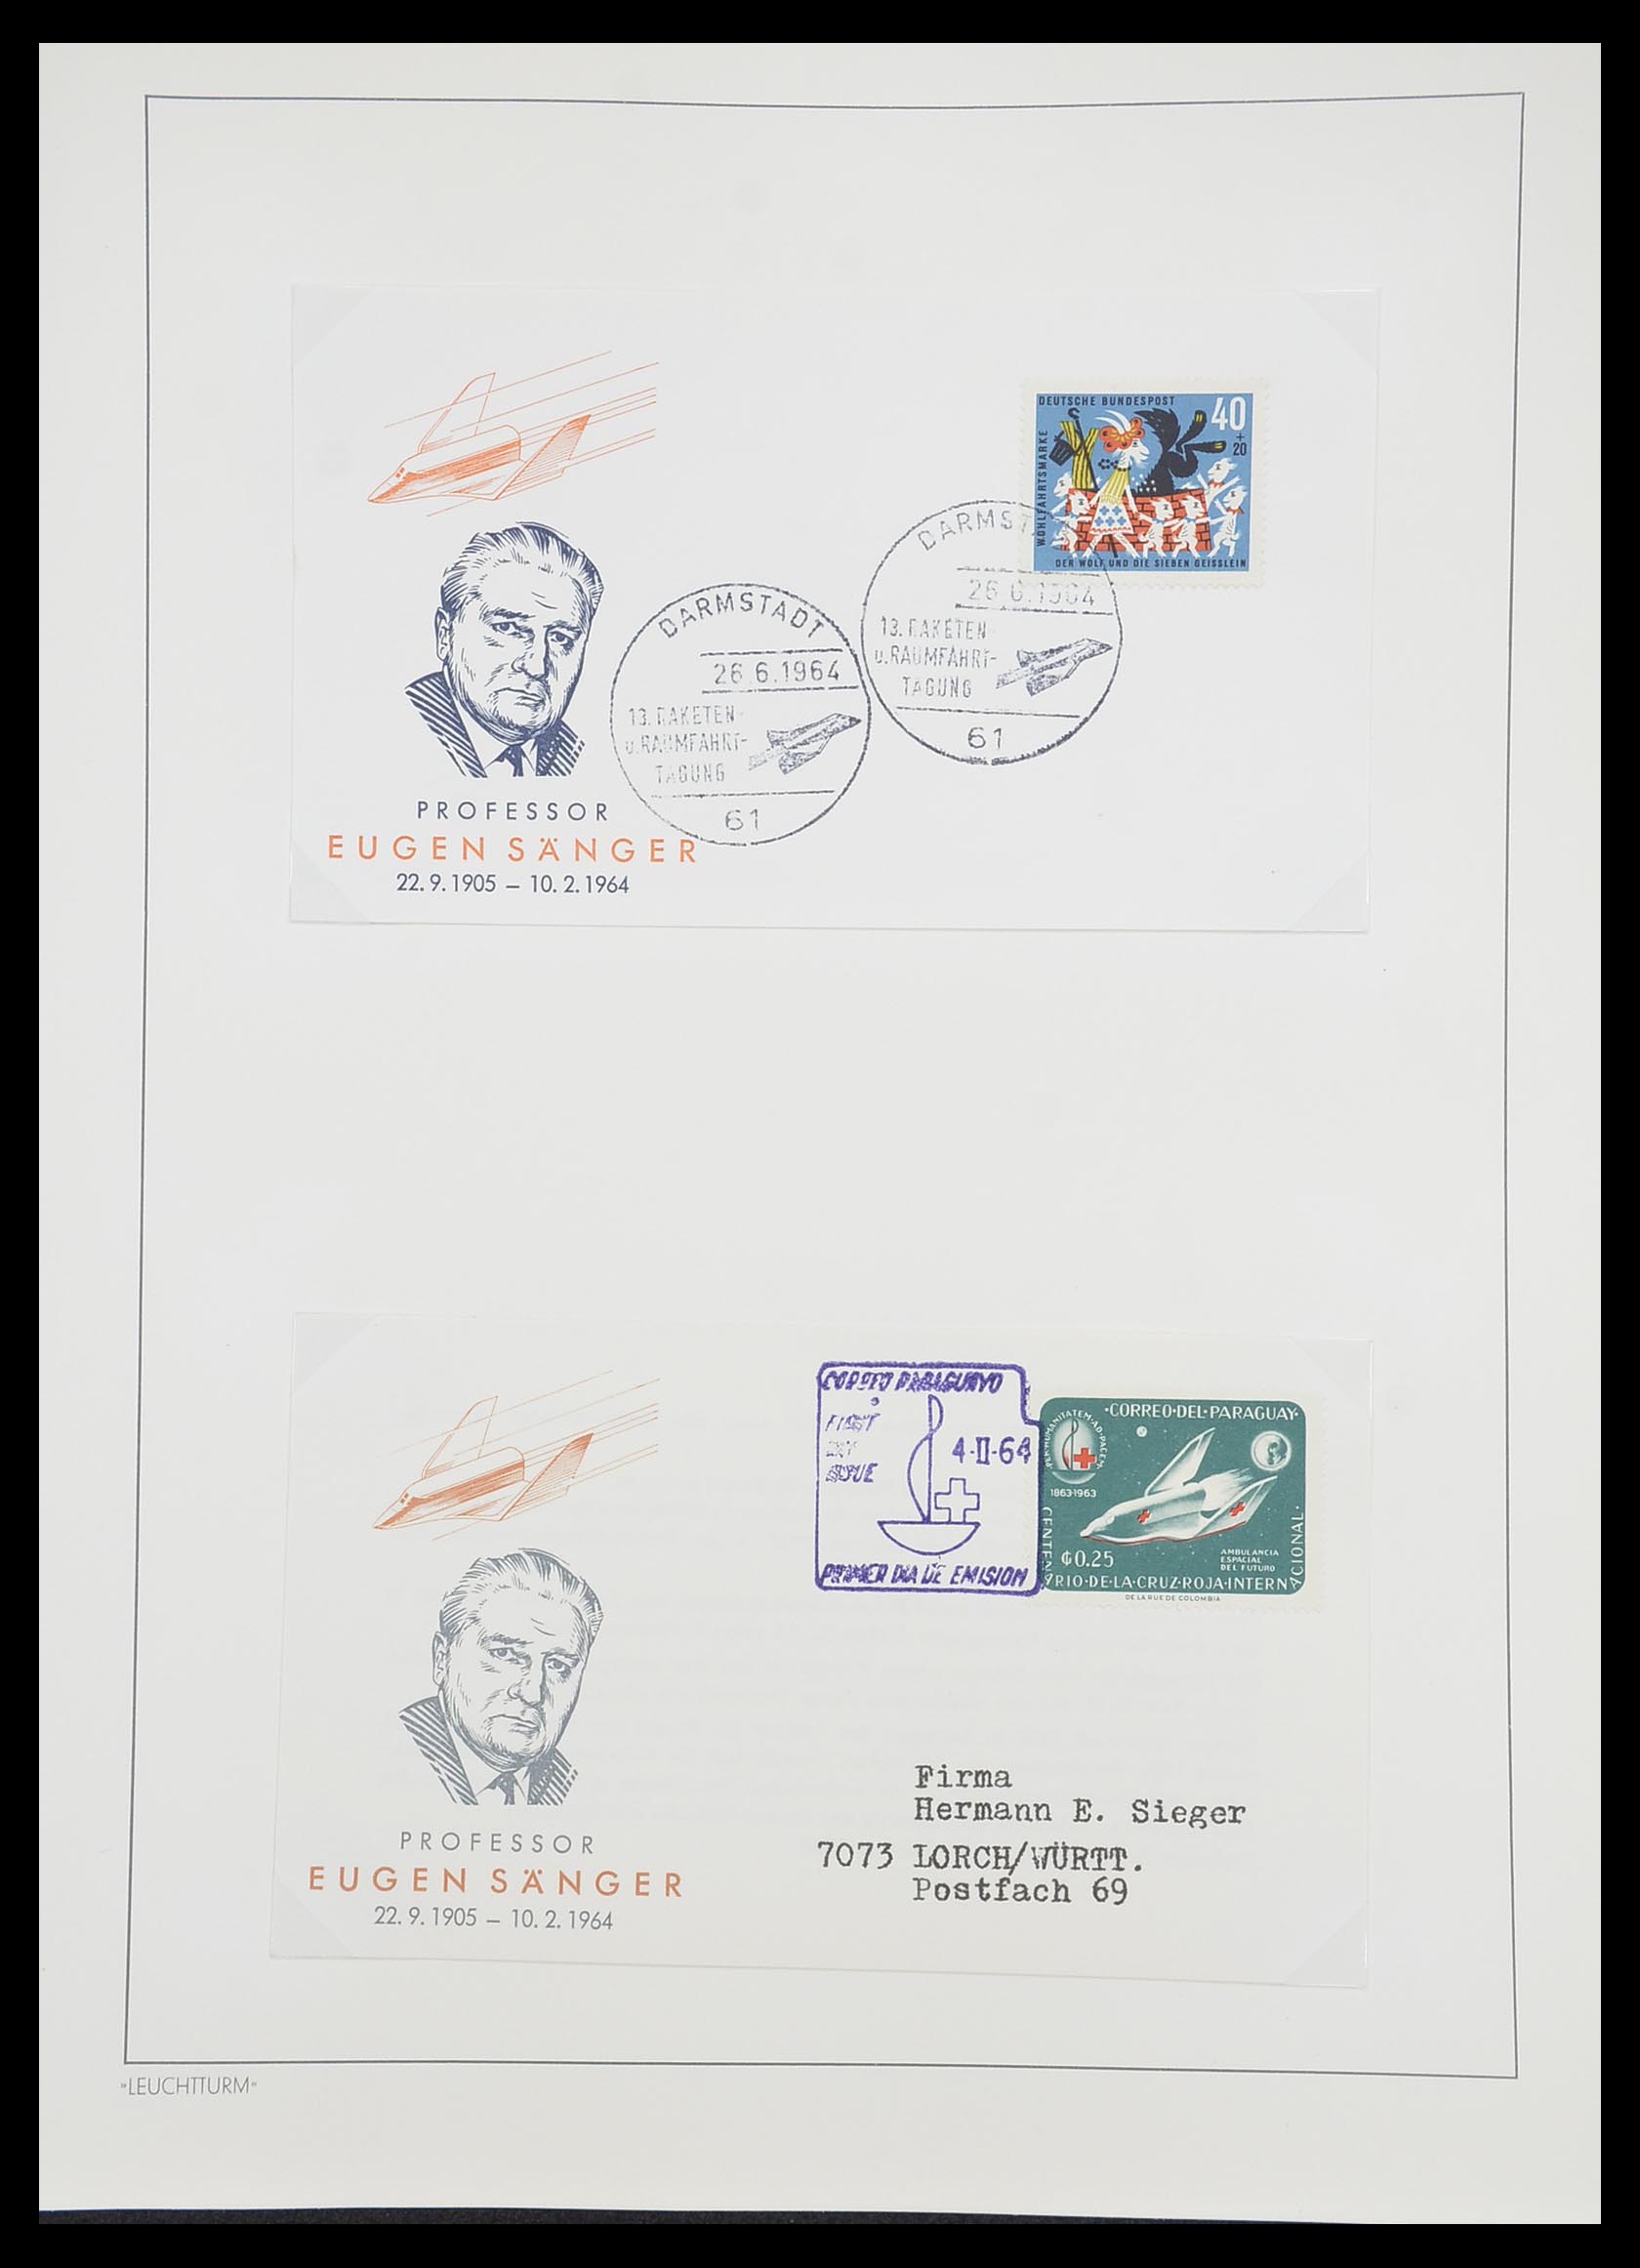 33463 120 - Stamp collection 33463 Rocket mail covers.